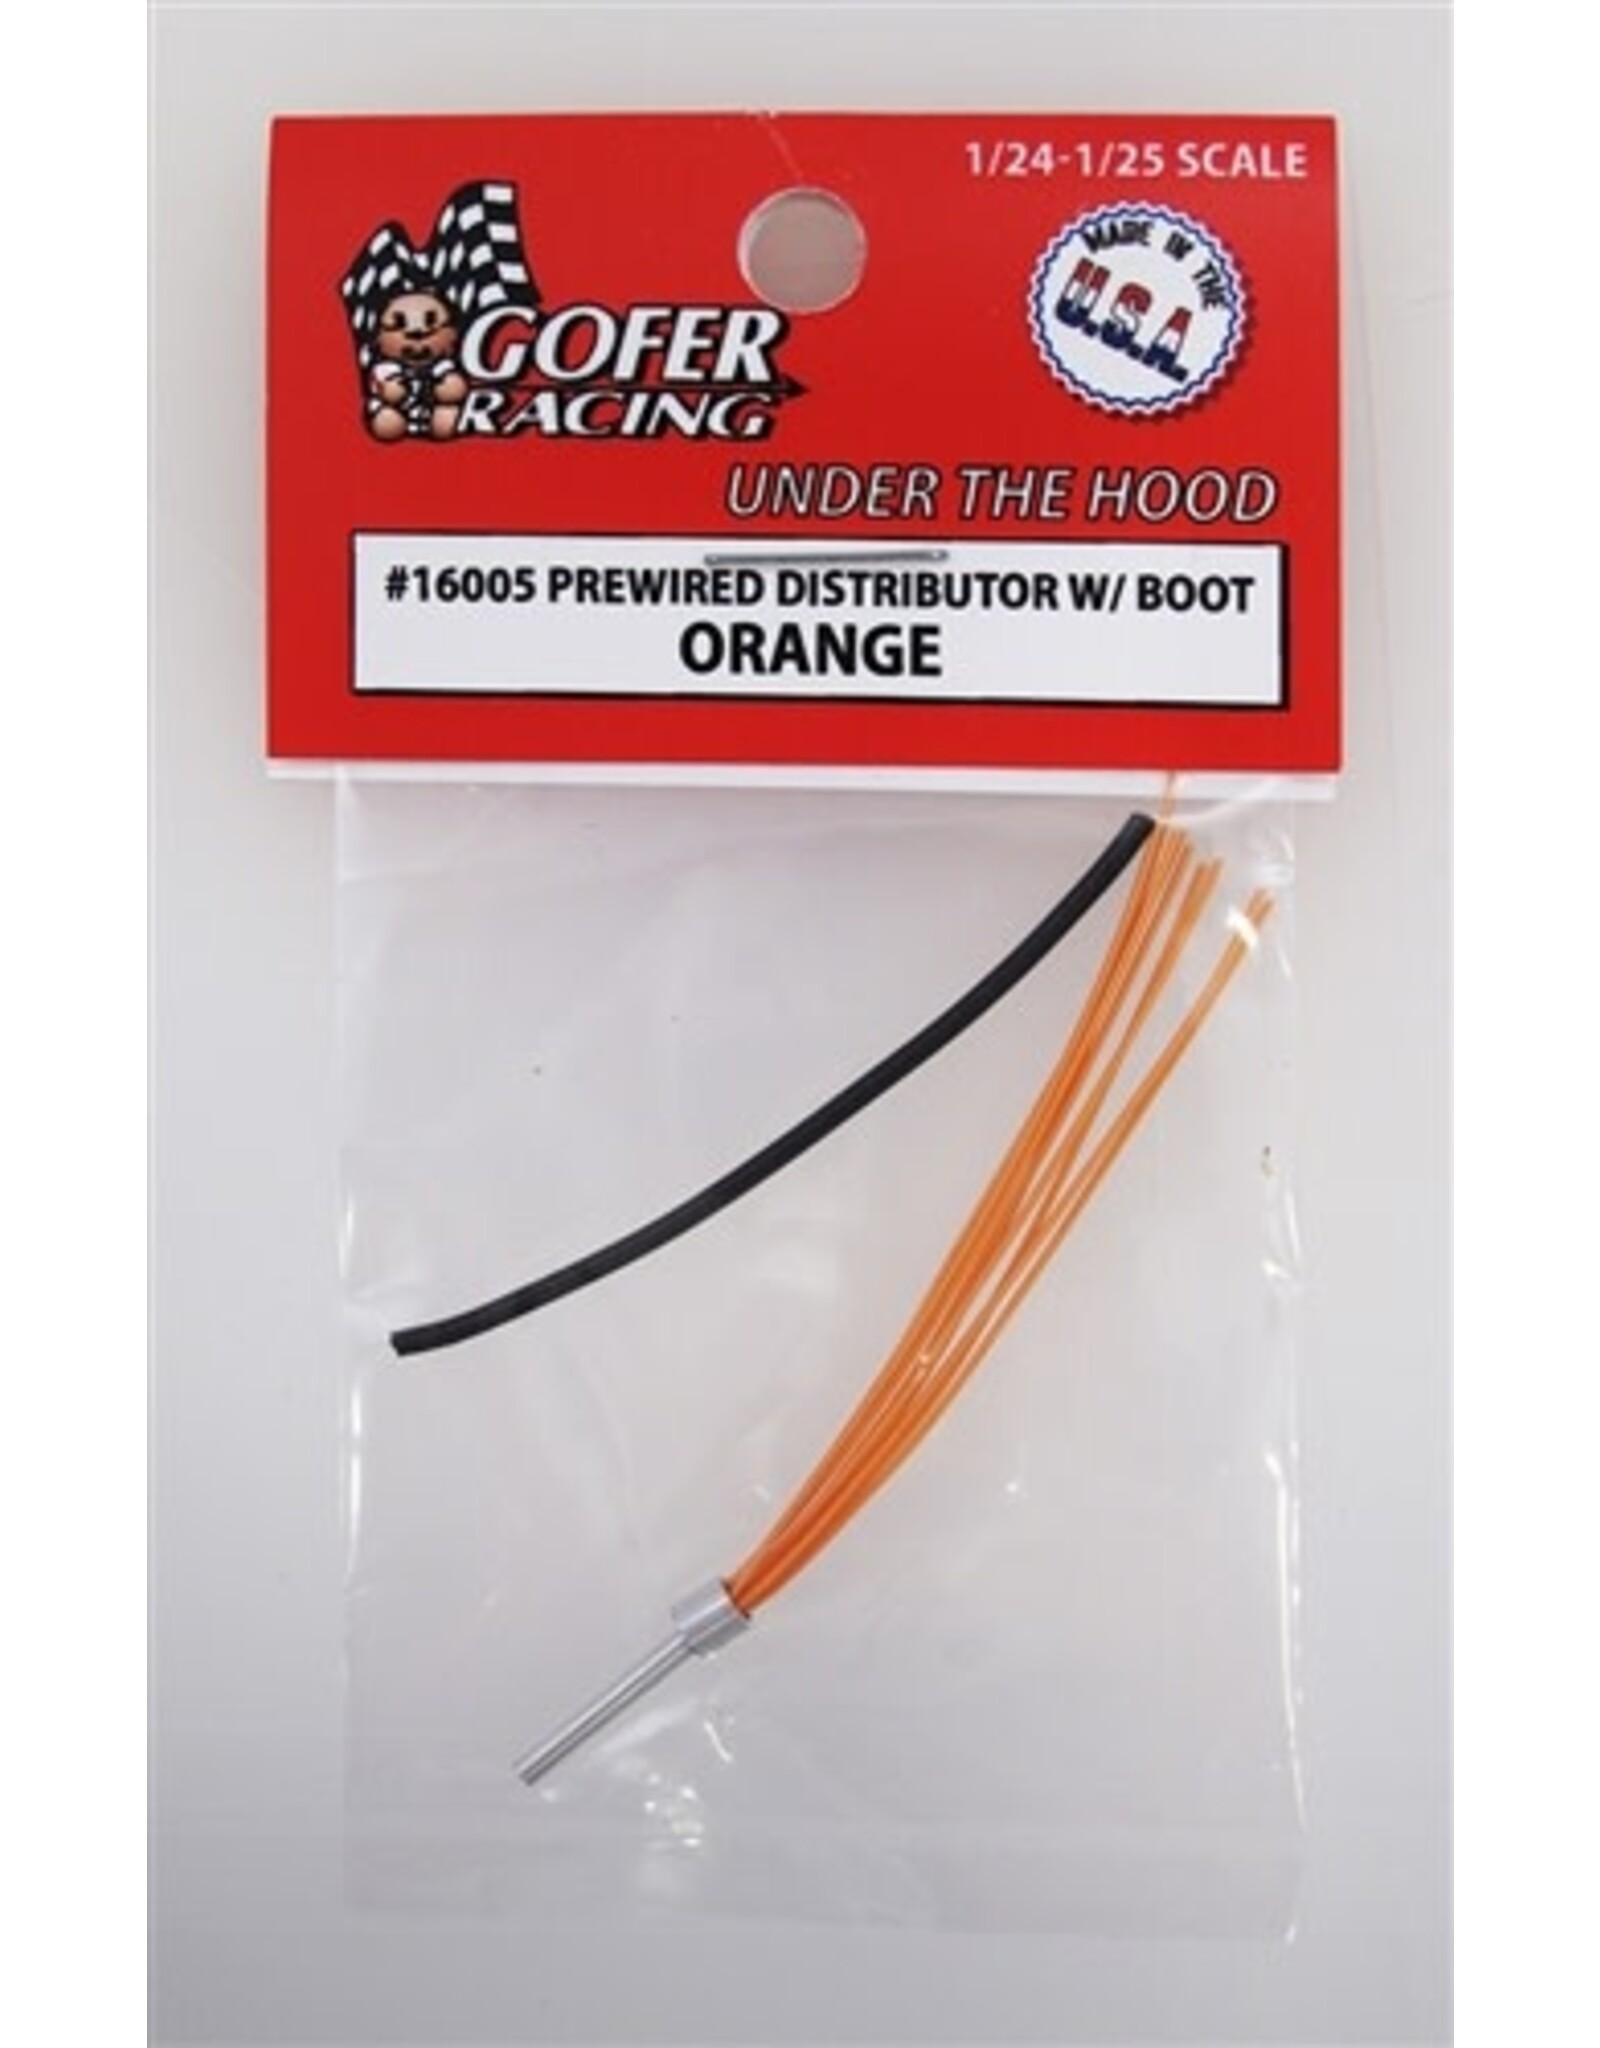 Gofer Racing Prewired Distributor With Boot - Orange 1/24